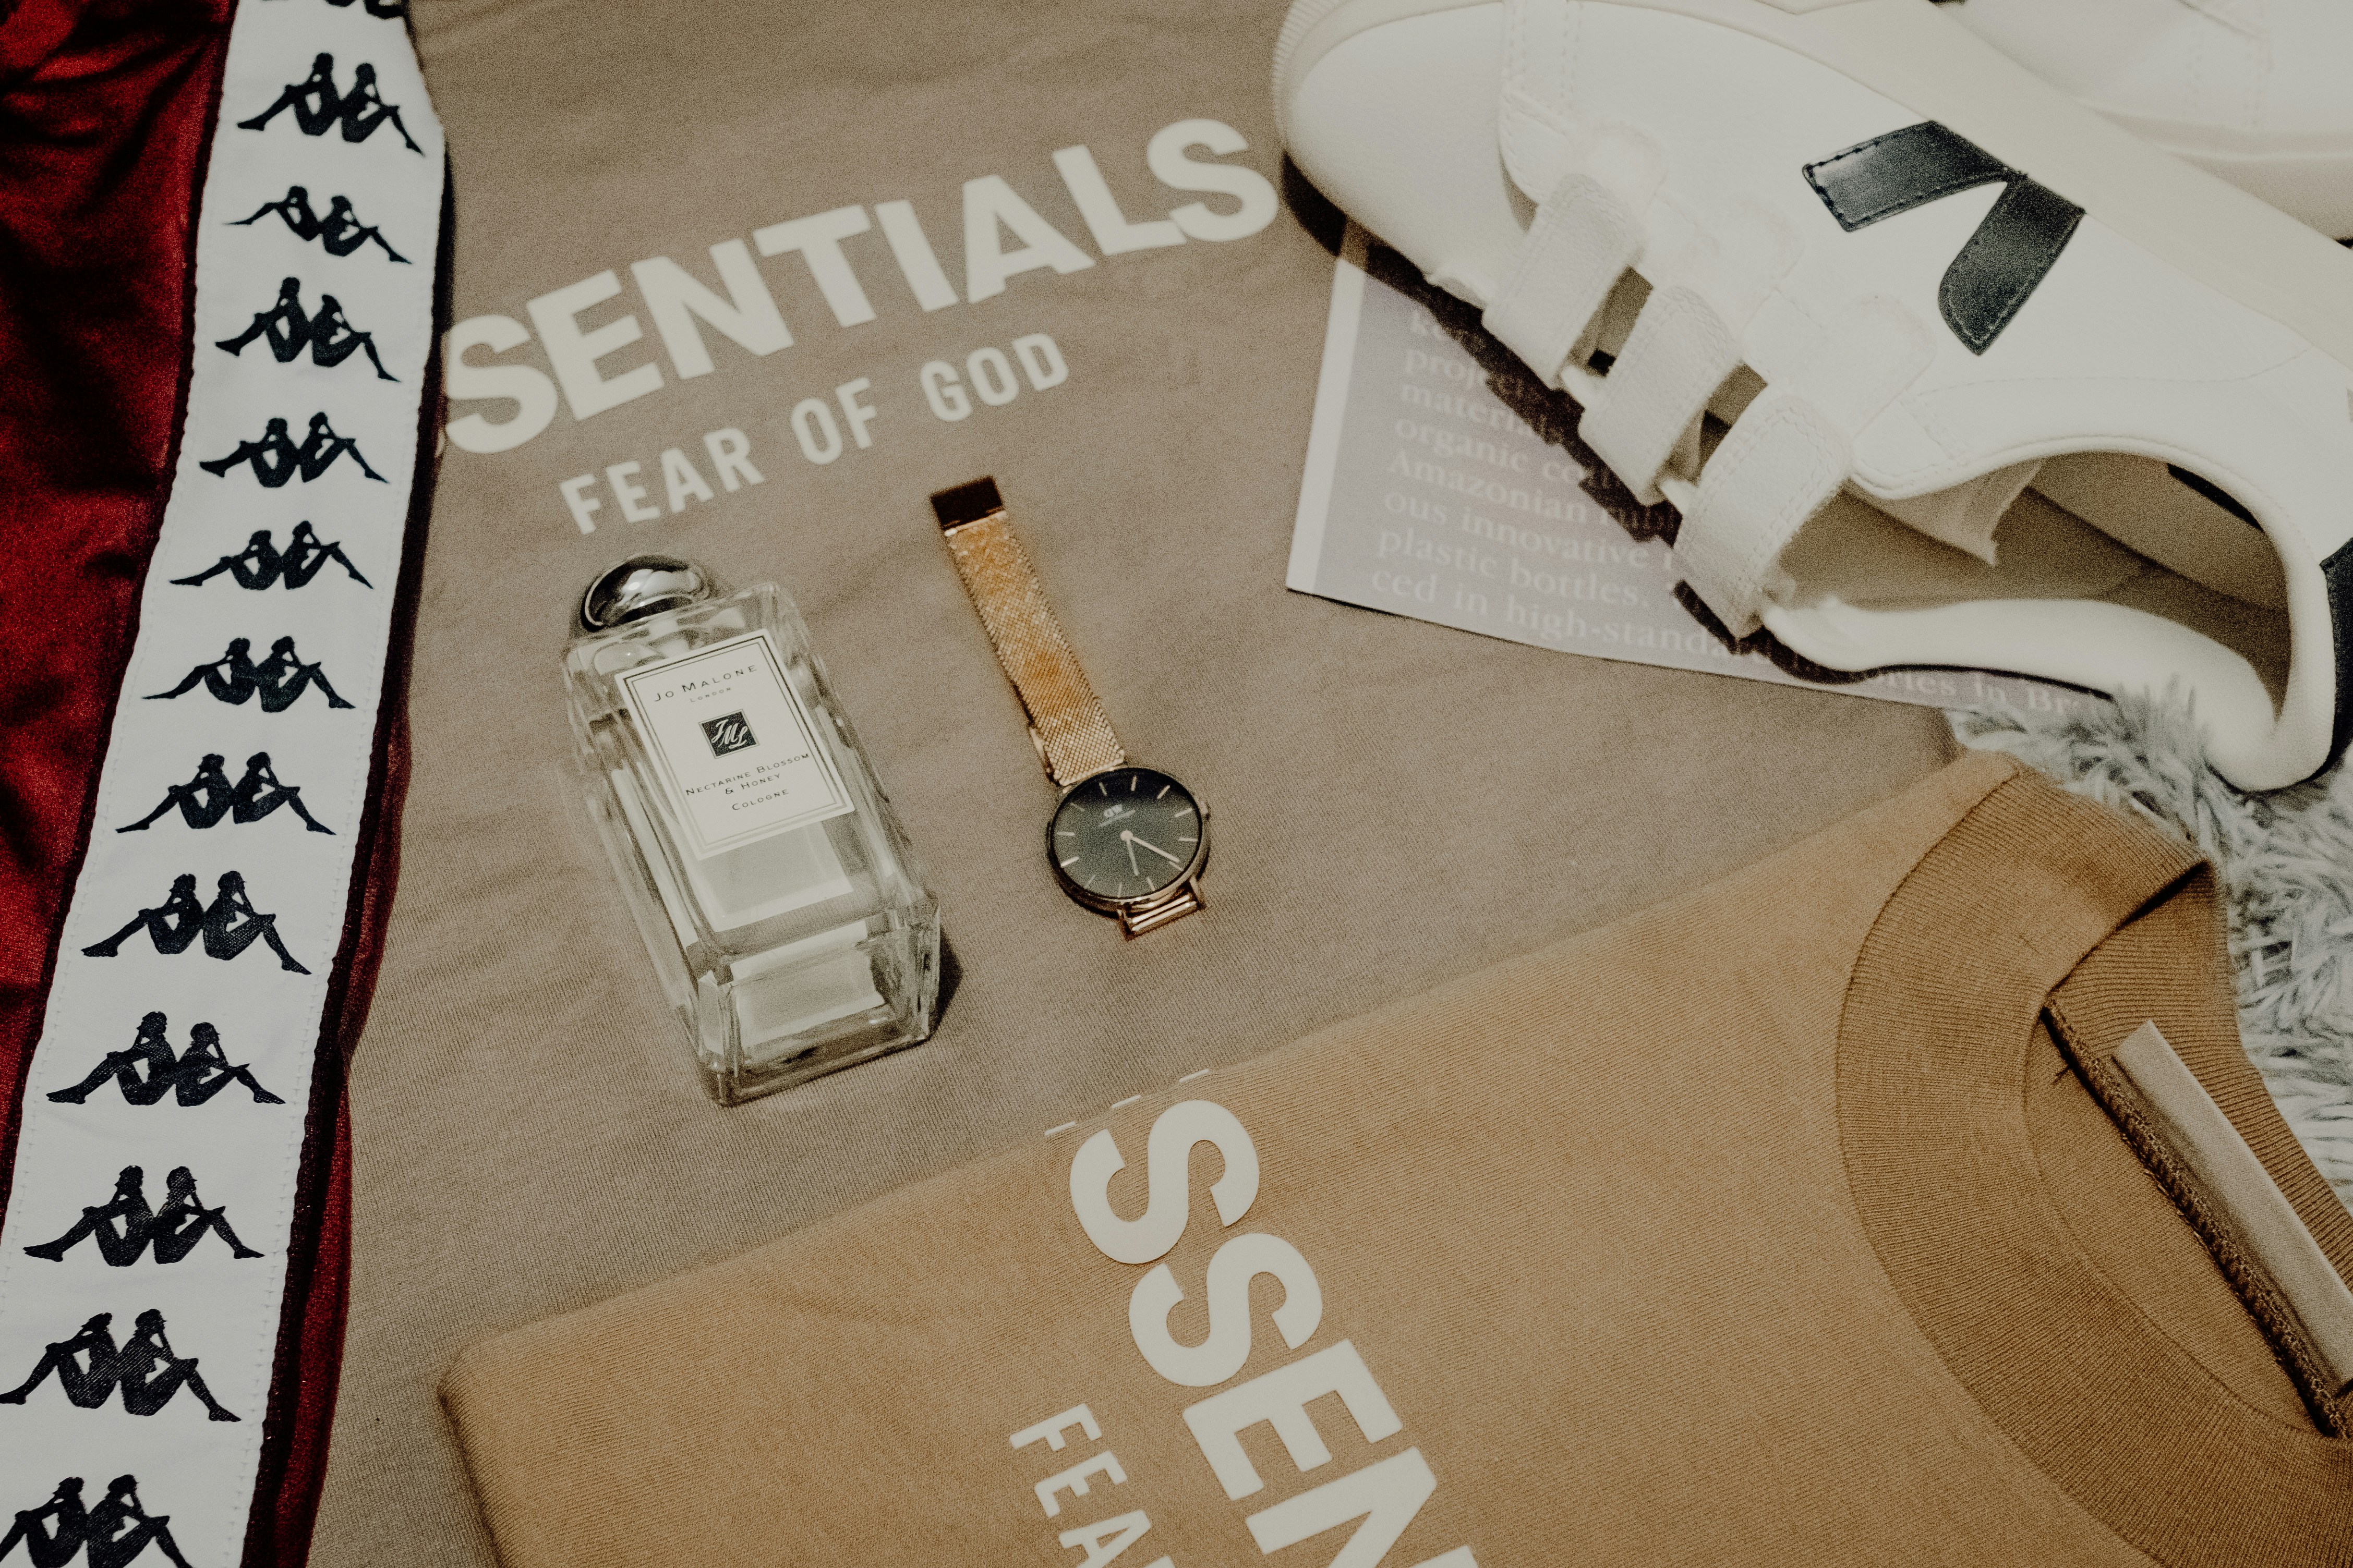 Essentials Fear of God and Veja sneakers